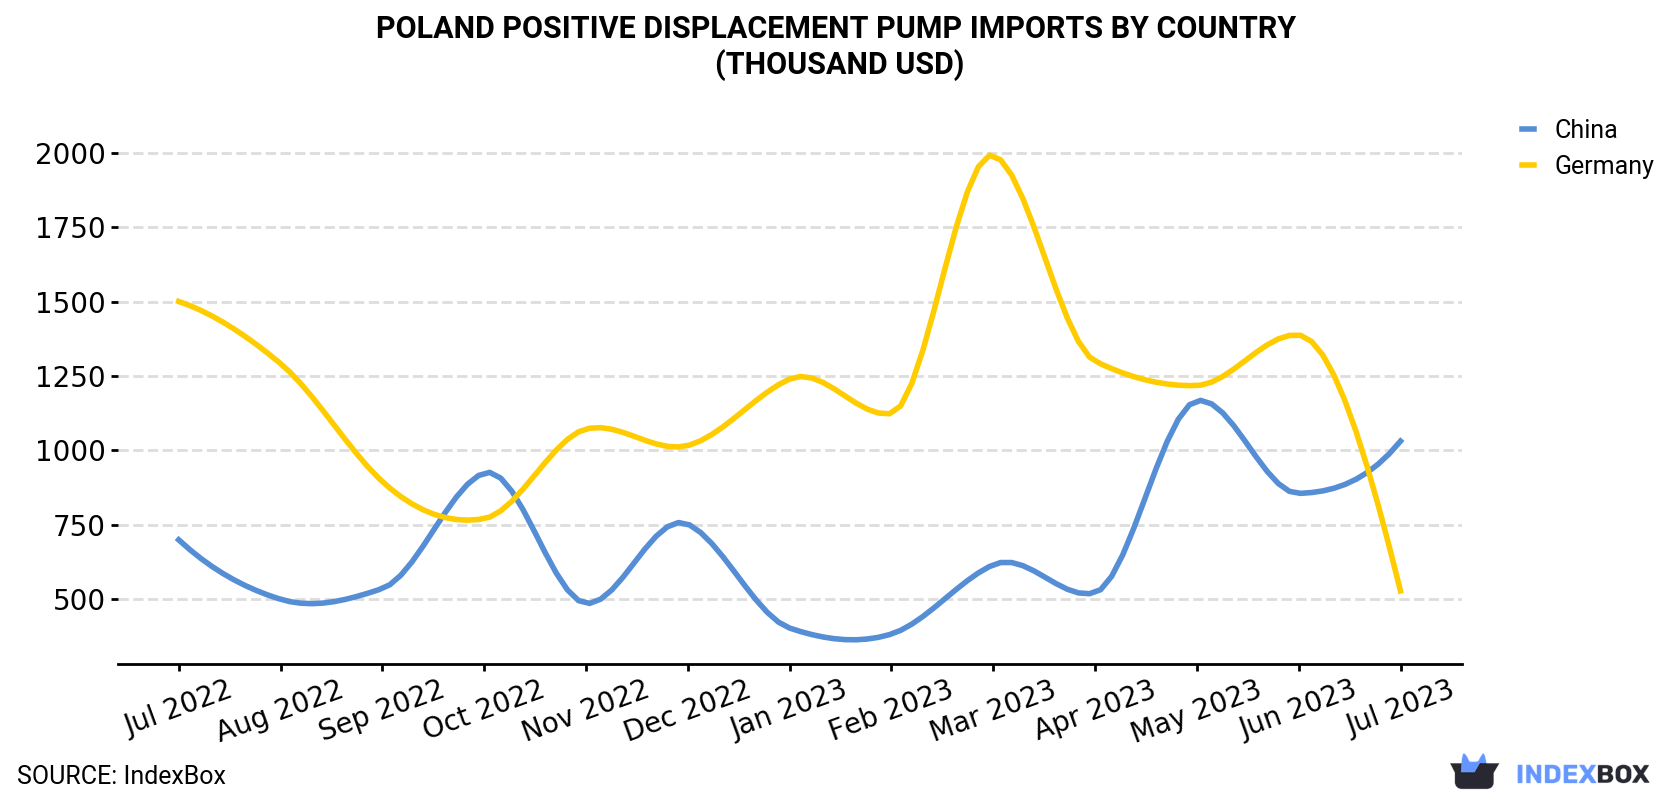 Poland Positive Displacement Pump Imports By Country (Thousand USD)